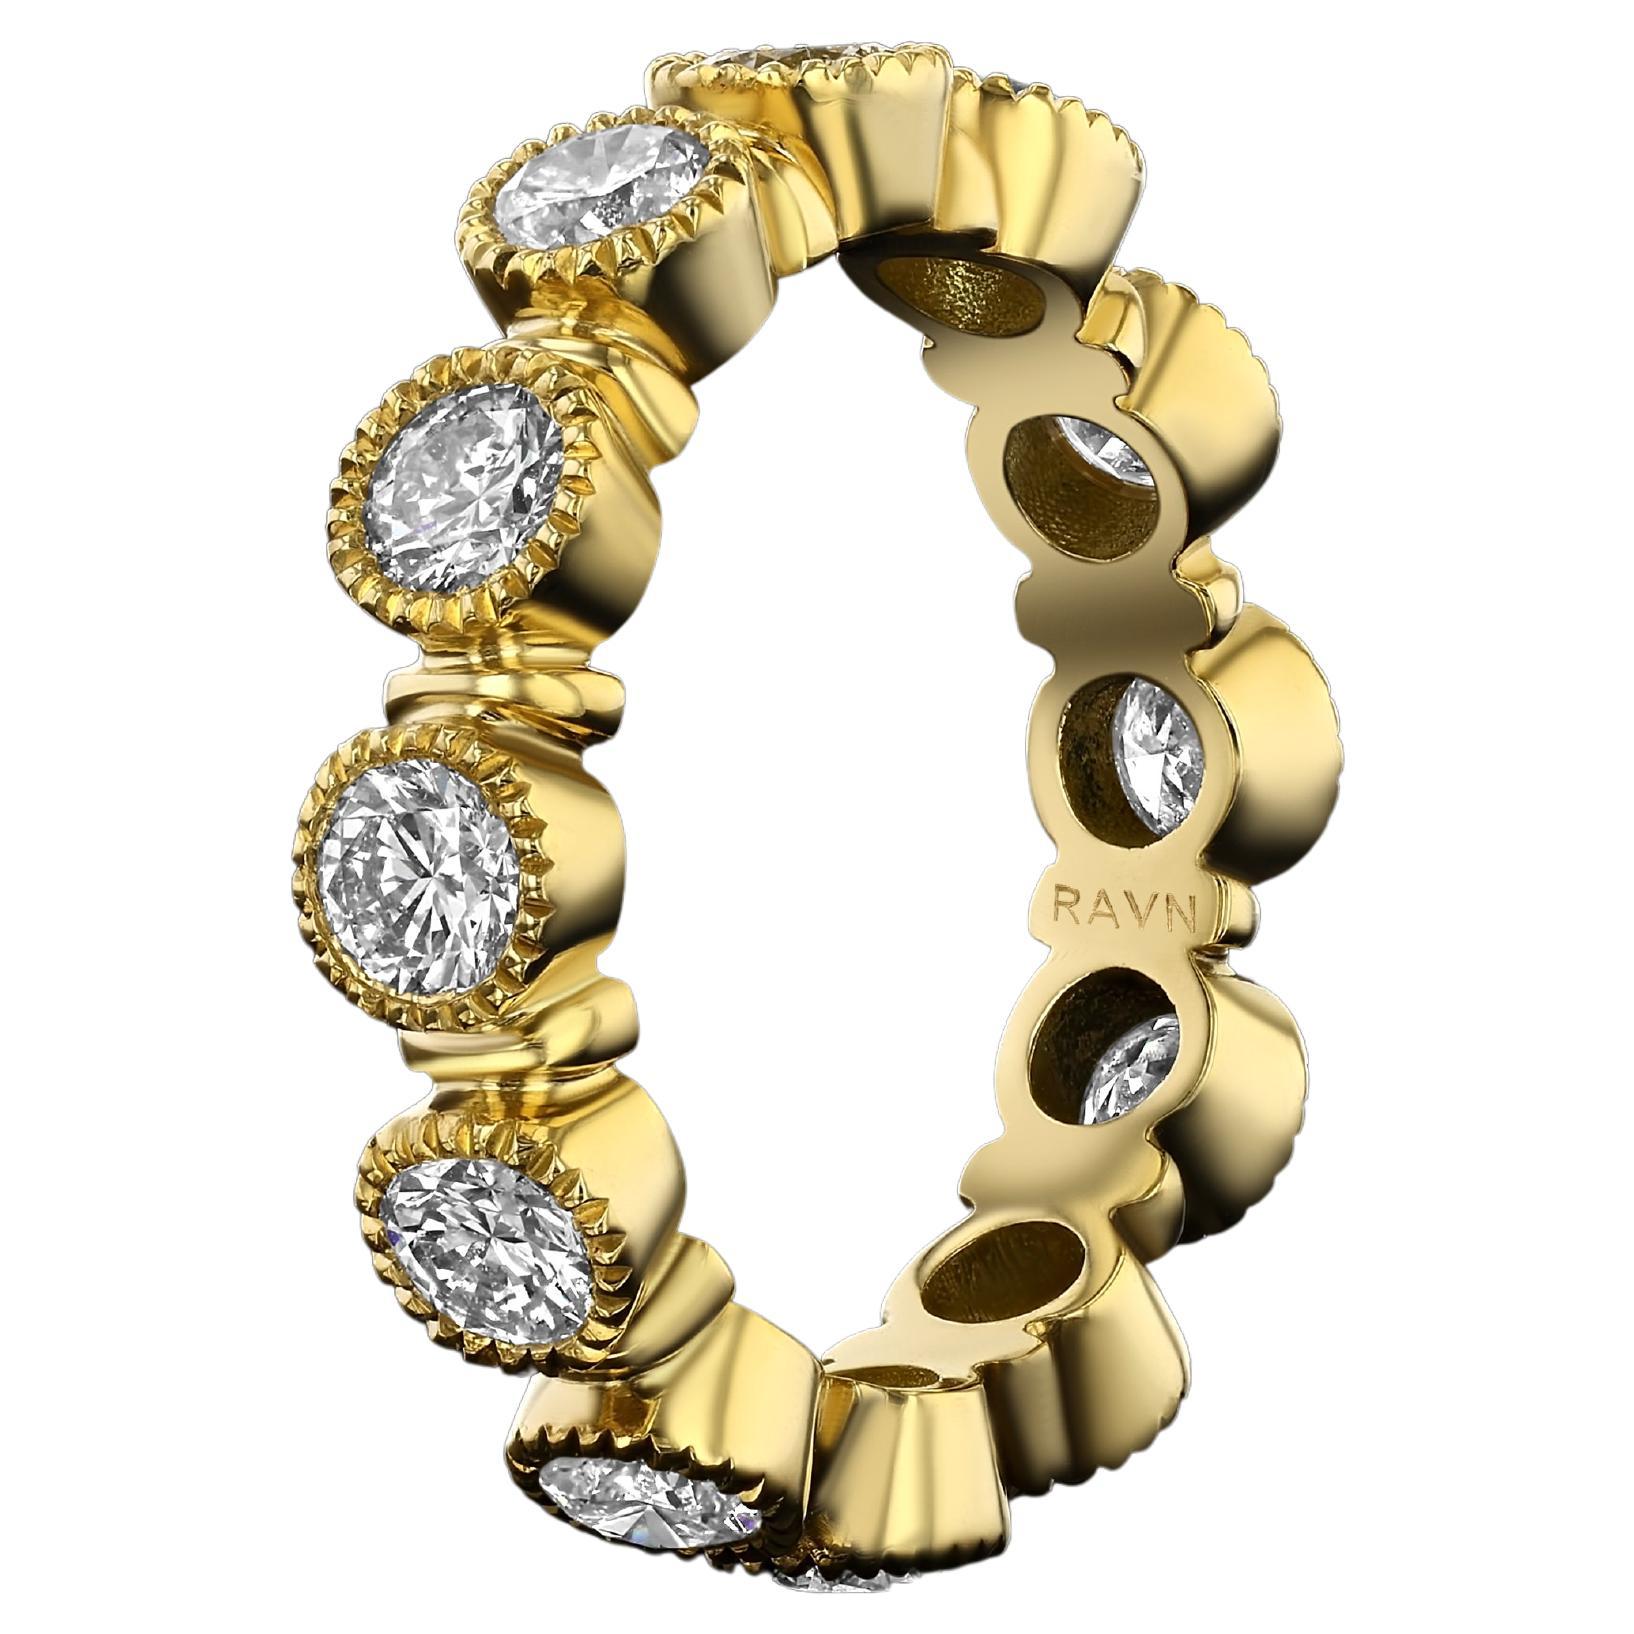 For Sale:  House of RAVN, 18k Gold, Old World Arpeggio Eternity Ring with 12 Diamonds, 2ct